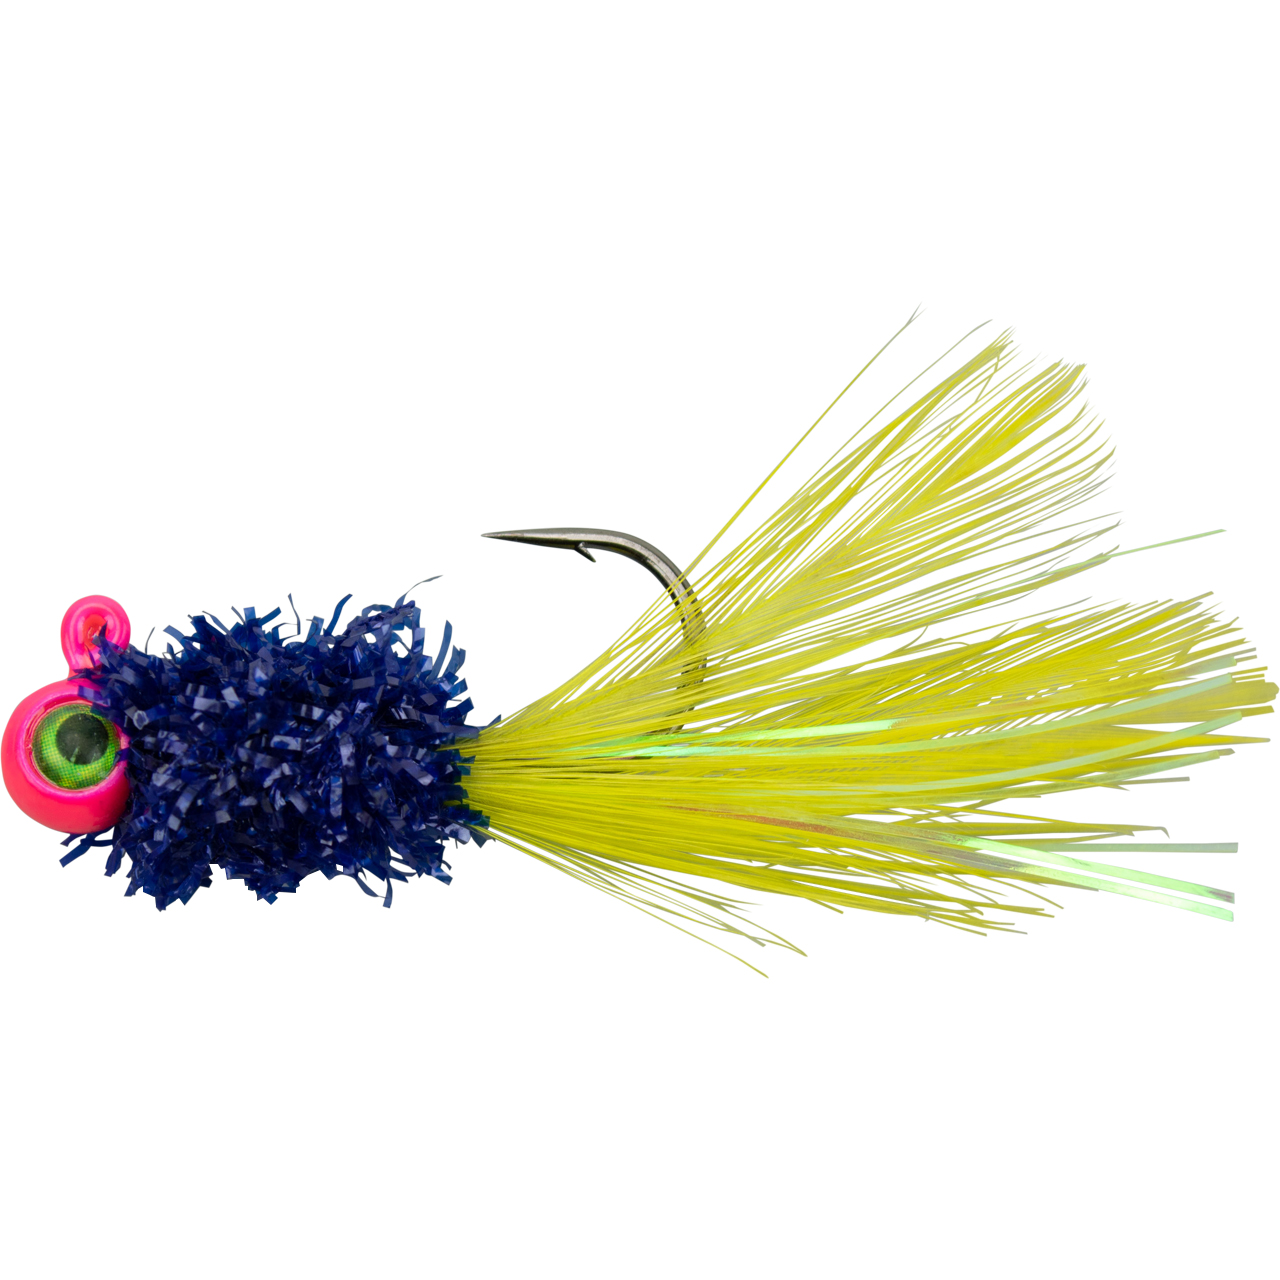 Jenko Kevin Rogers Warbird Hand Tied Jig 1/8 oz / Yellow/White/Blue